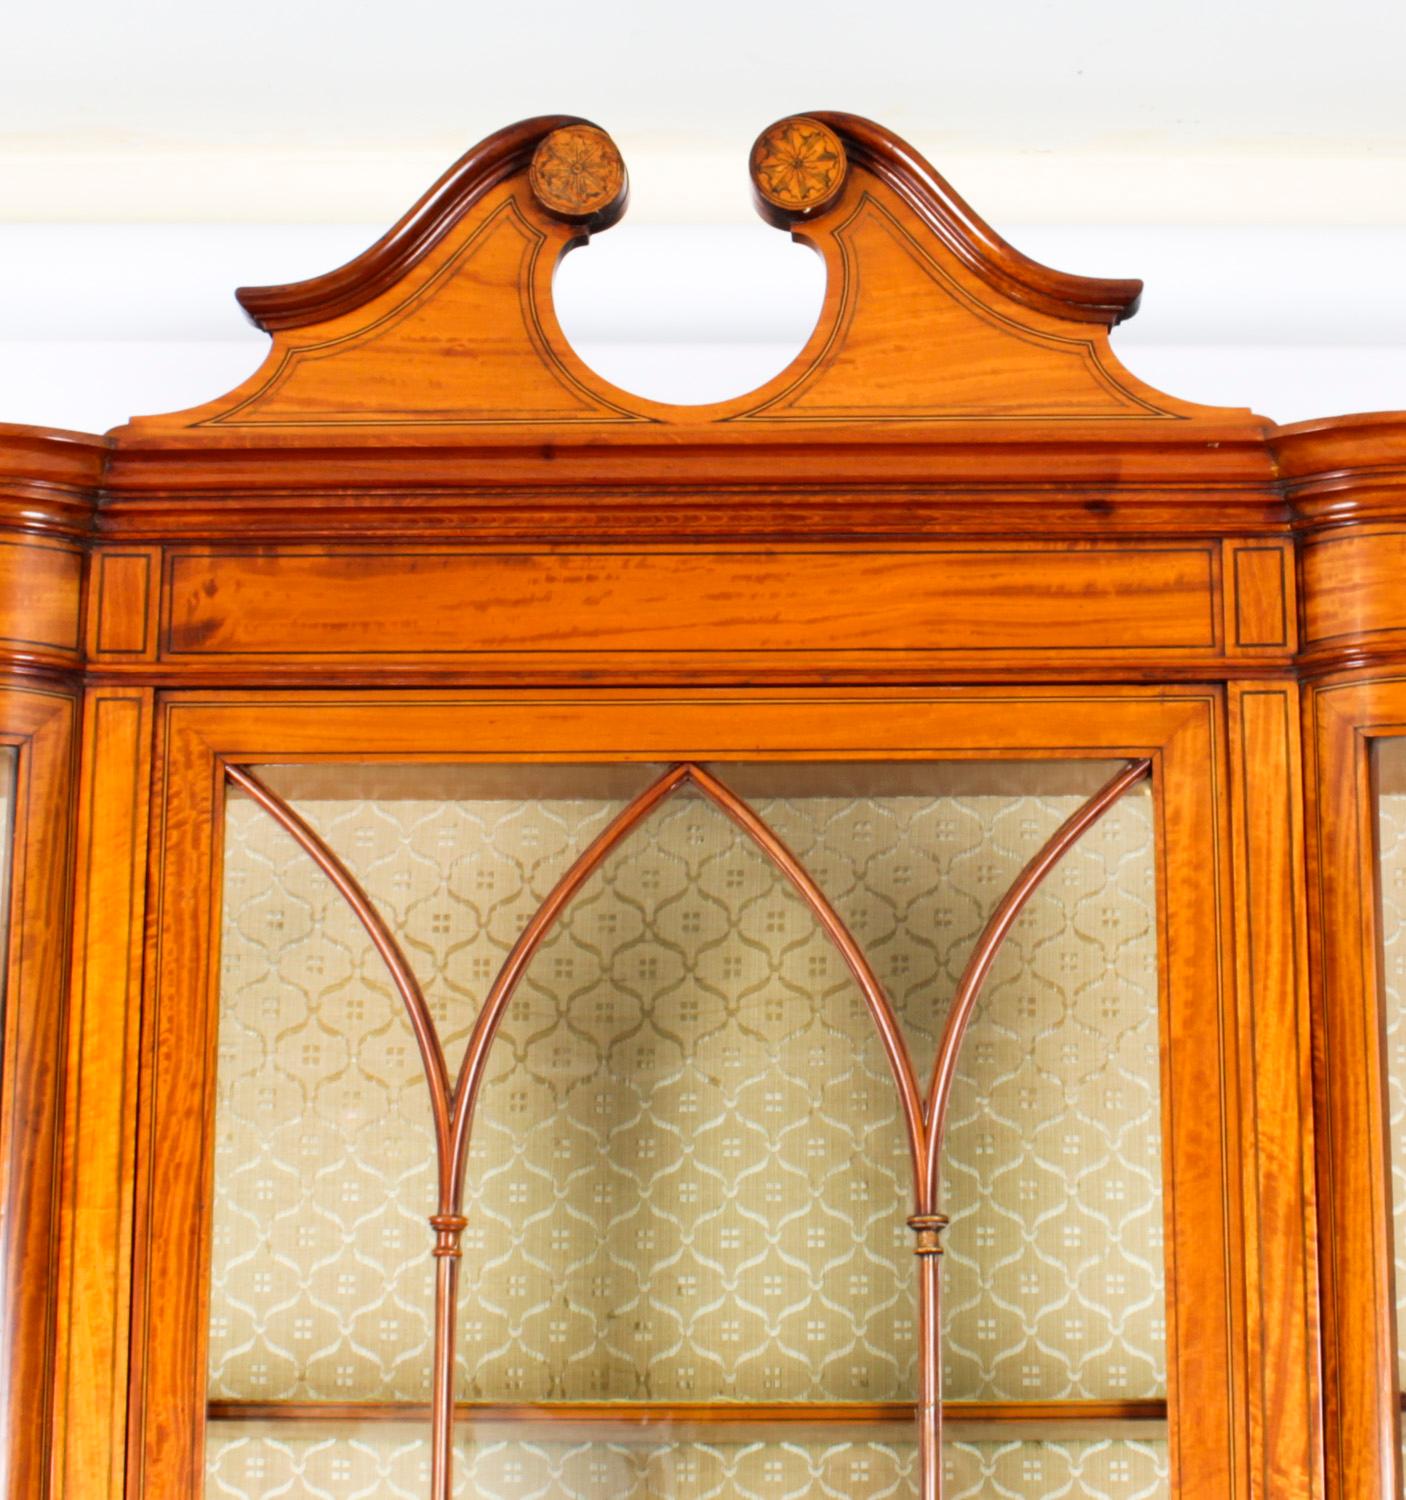 A stunning antique English Edwardian satinwood serpentine display cabinet, Circa 1890 in date,

The top part is surmounted with a stunning broken pediment cornice and has a large central door with astragal glazing flanked by shaped serpentine